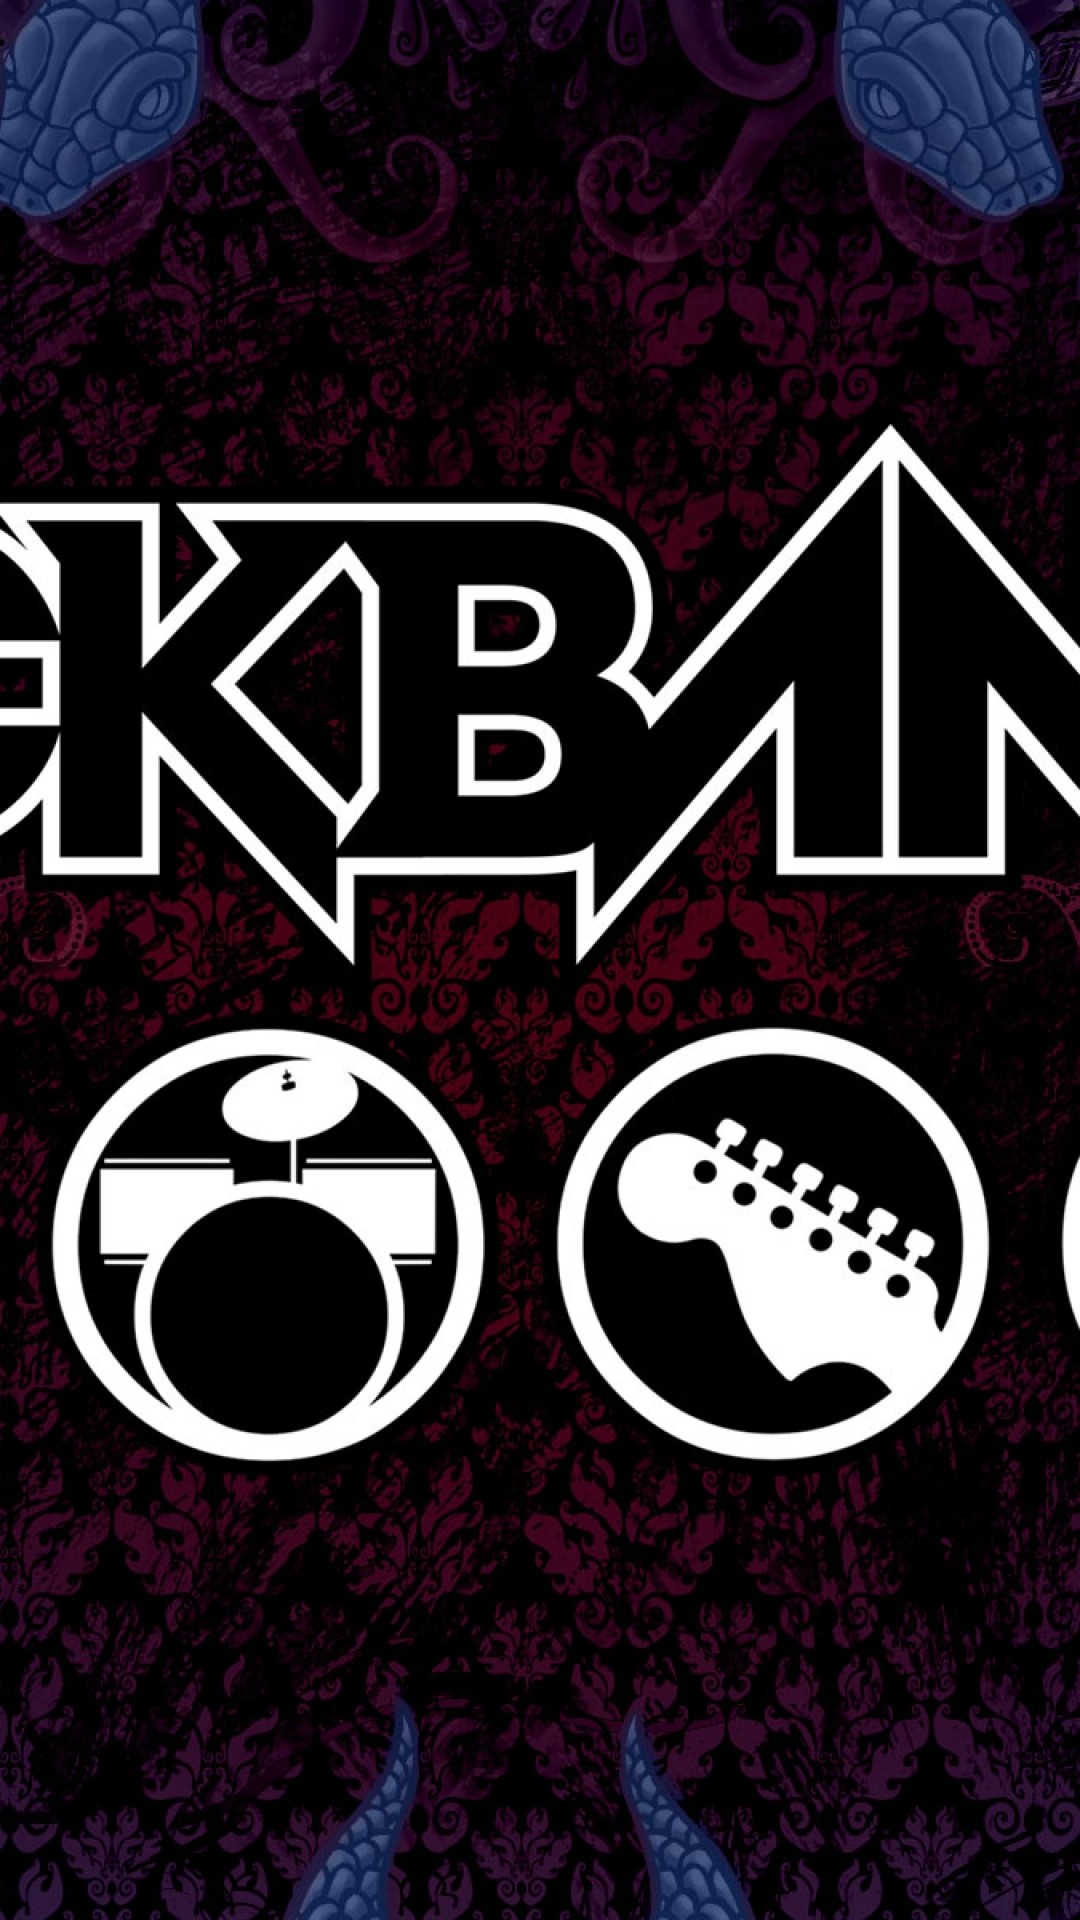 rock band wallpapers,font,logo,outerwear,games,graphic design